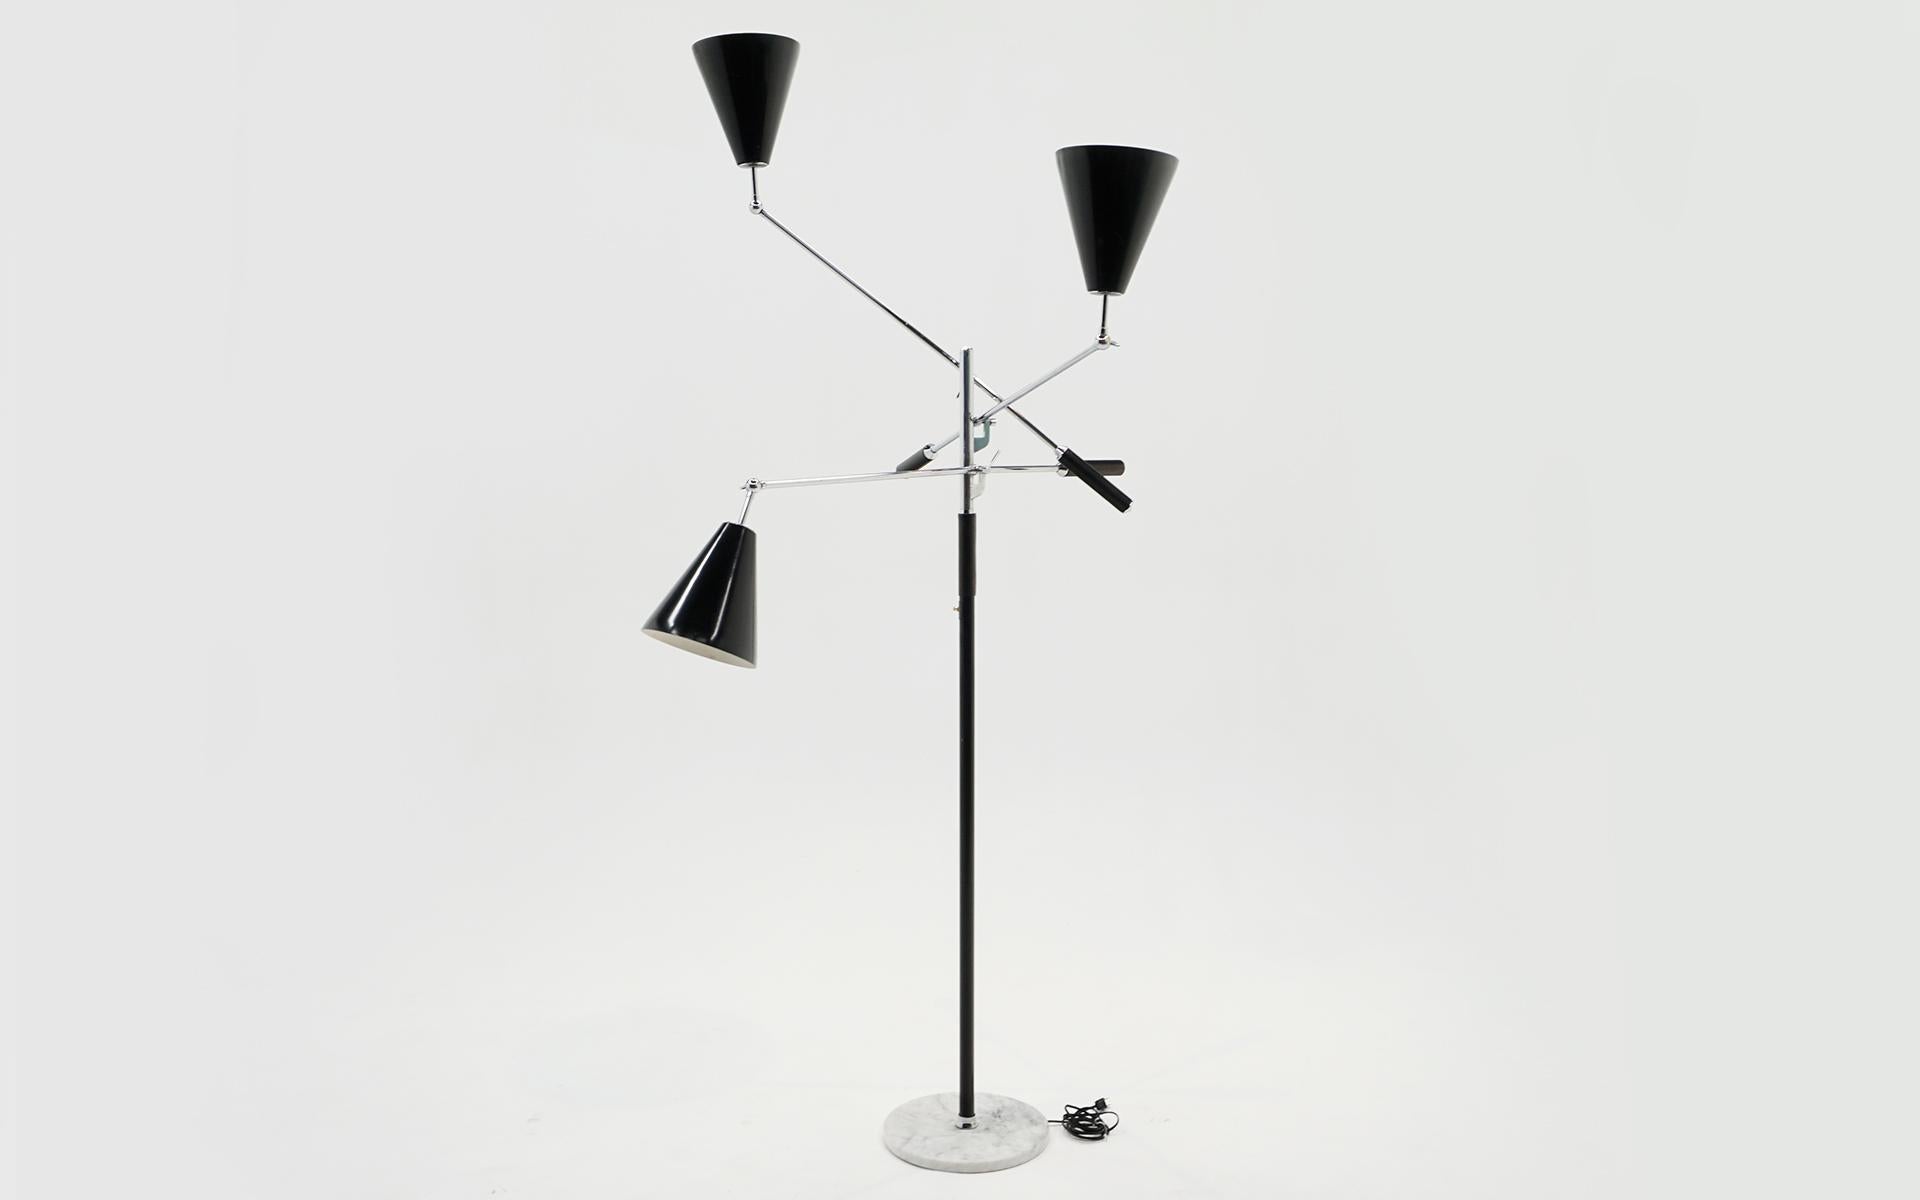 Classic three arm Italian adjustable floor lamp in the style of Arredoluce. For years these lamps were attributed to Arredoluce. Chromed steel independently adjustable arms with black leather covered handles, black shades, and a round white marble